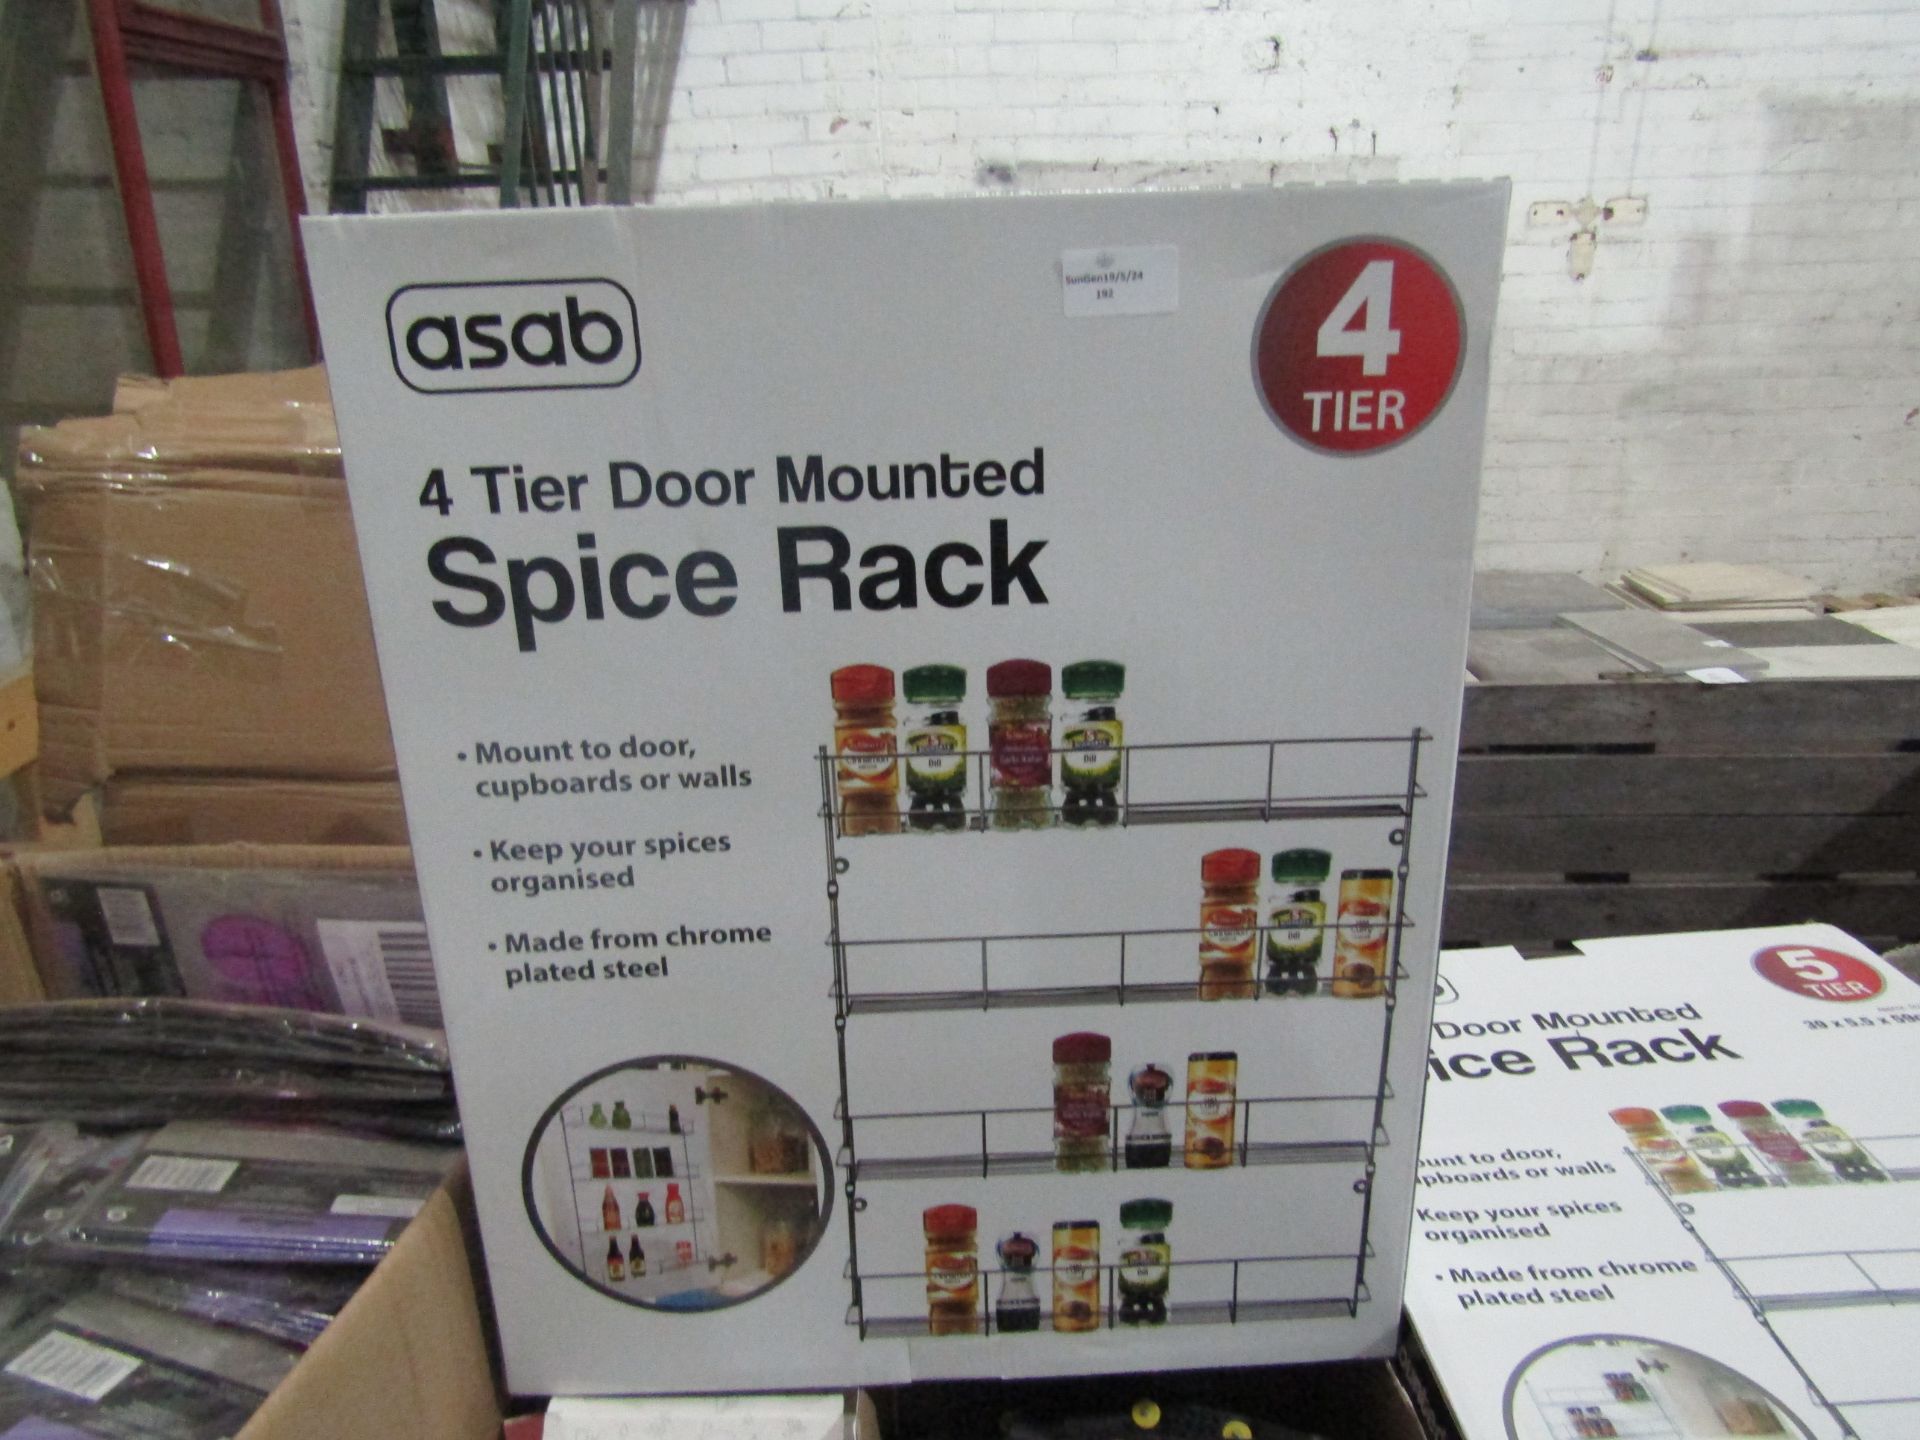 3x Asab 4 Tier Door Mounted Spice Rack - All Unchecked & Boxed.